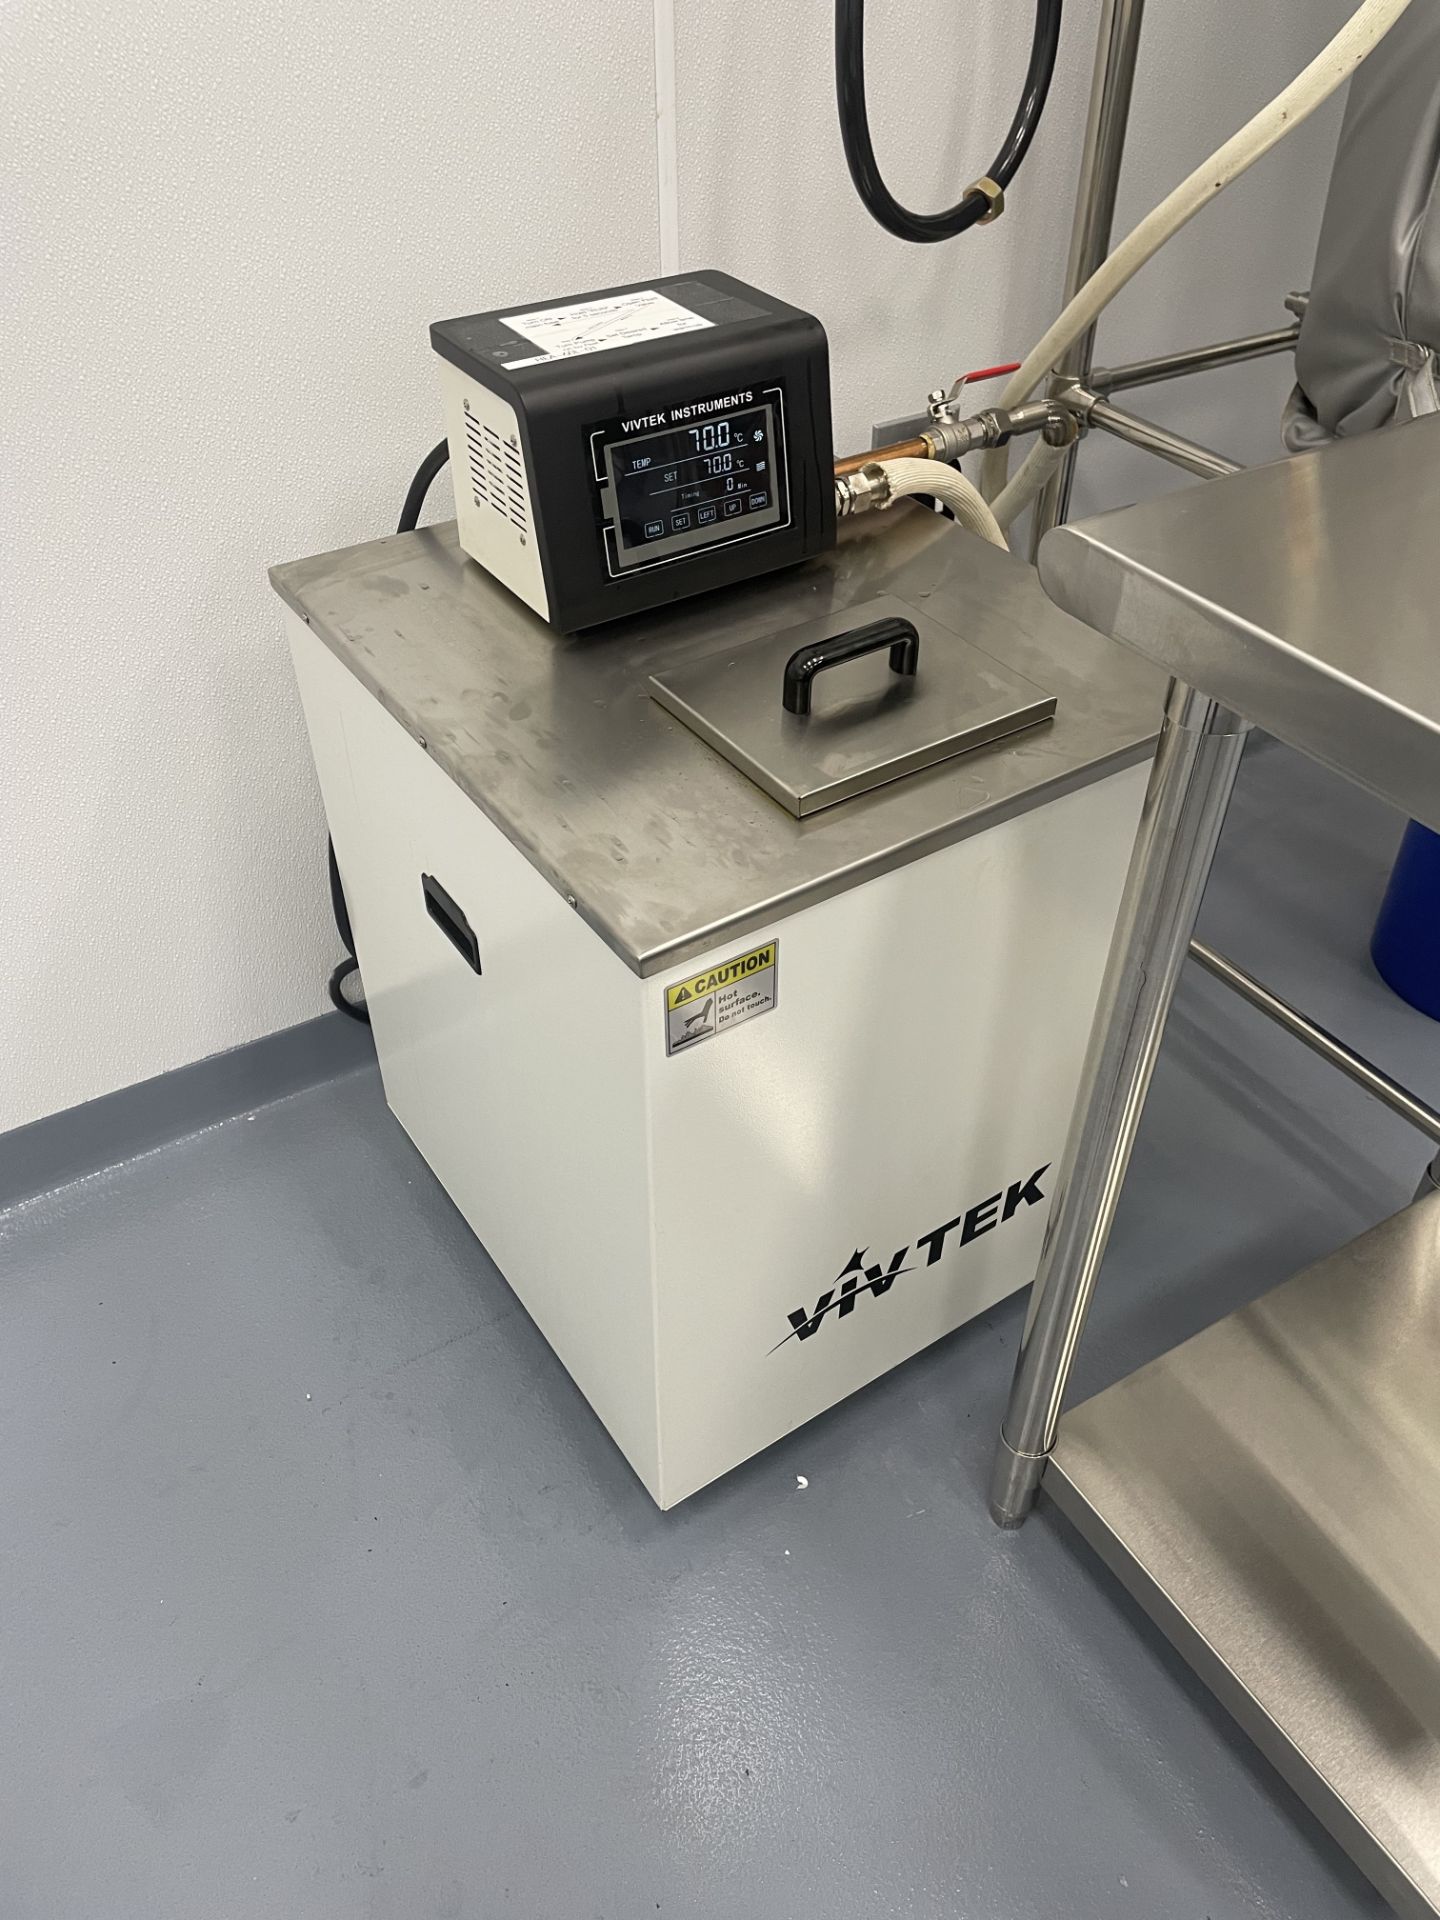 Used 200 L Agitated Jacketed Glass Reactor with Vivtek Chilling/ Heating Unit. - Image 7 of 11